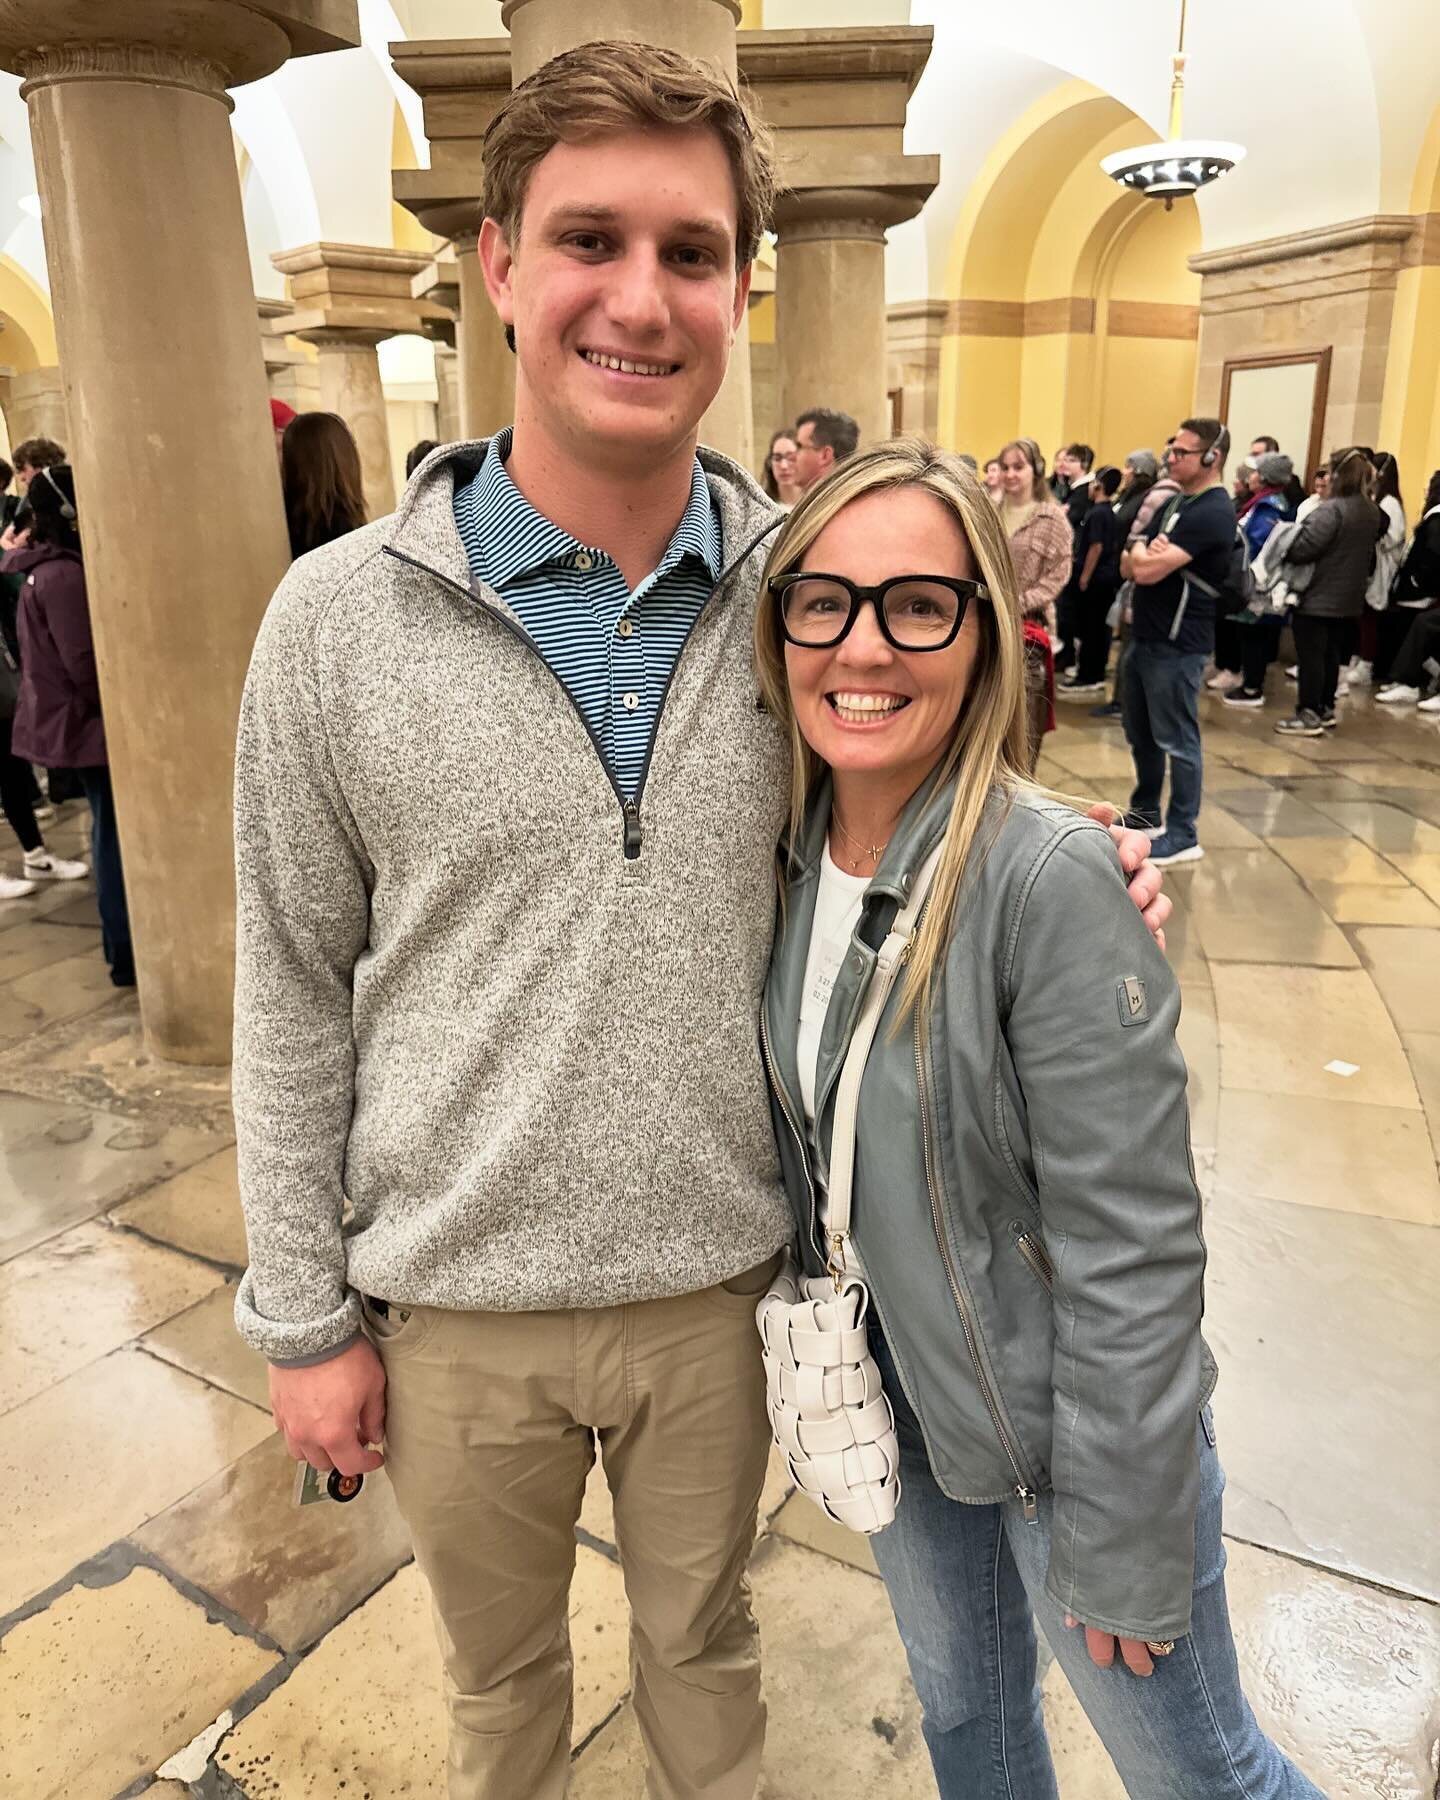 Getting a tour of the capitol today from my wonderful nephew Rusk who&rsquo;s a legislative aide for Senator Tuberville. I&rsquo;m so darn proud of him!

Meanwhile I&rsquo;m having alllll the feels from the three years I lived here and worked at @ado